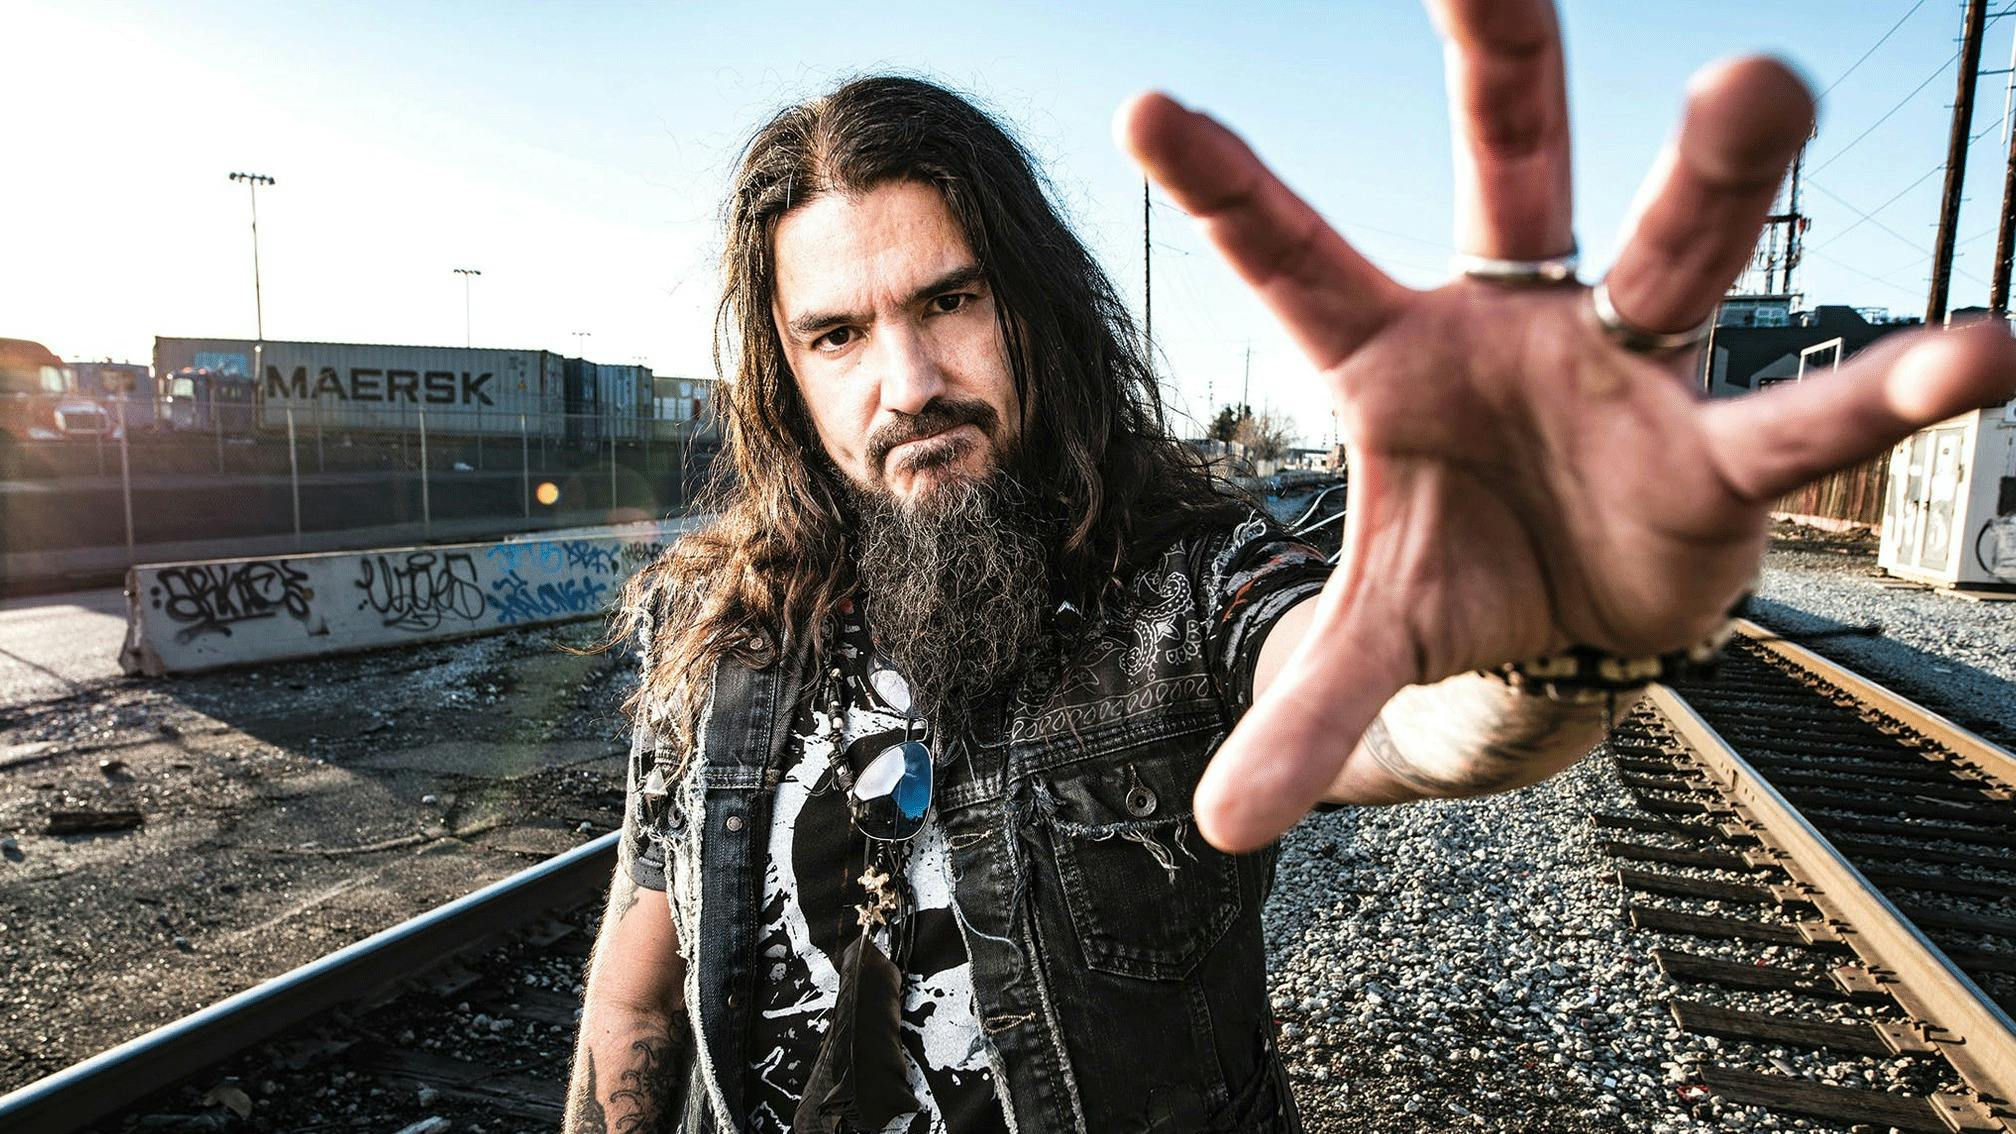 Bad pillows, rap festivals and a 'sh*t-shelf': Life on the road with Robb Flynn